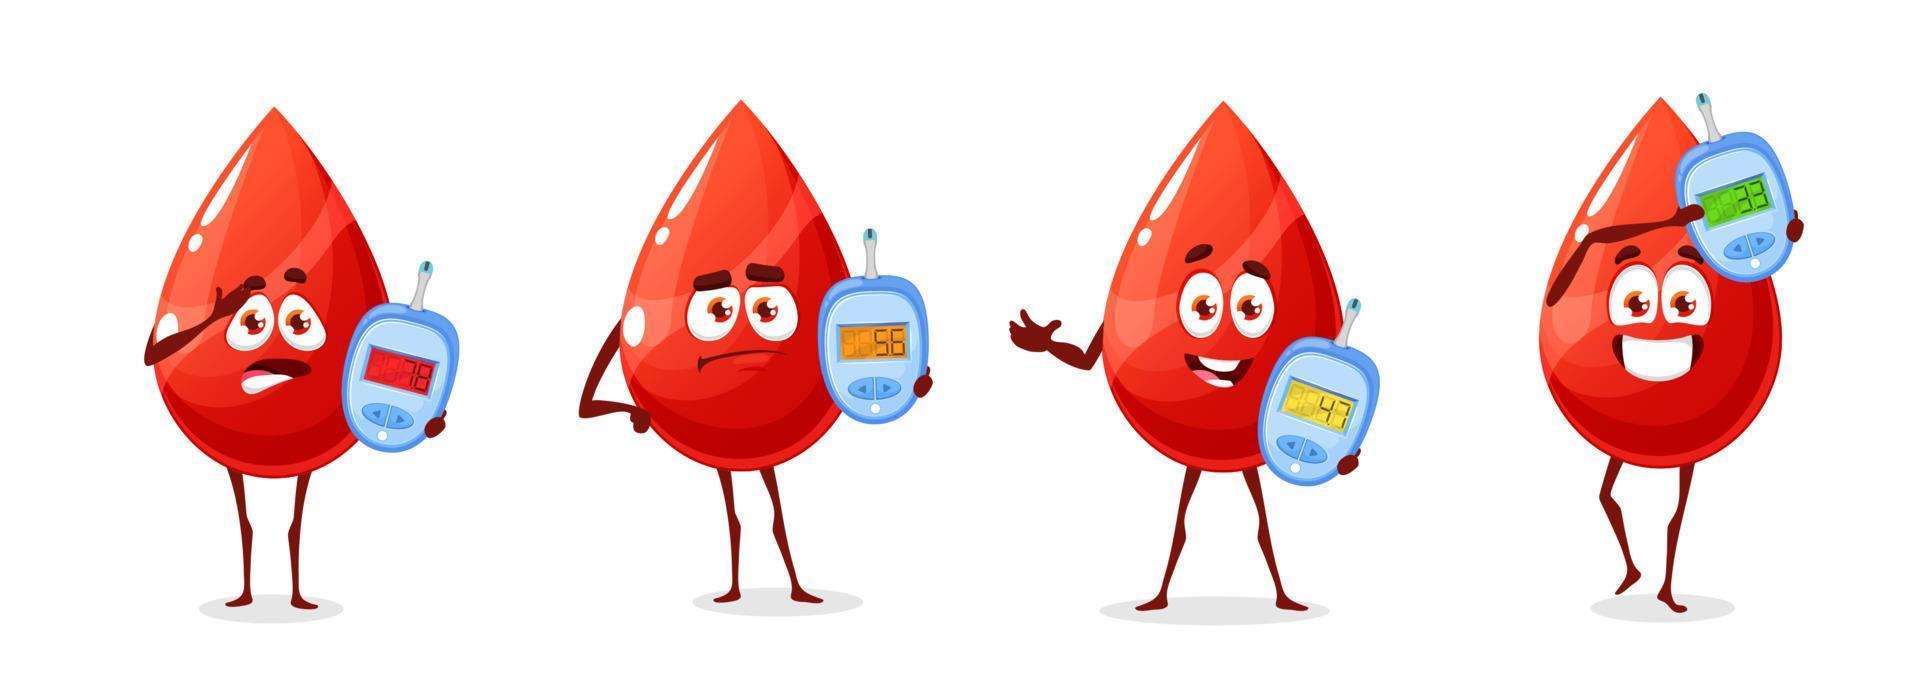 Diabetes characters, cartoon blood with glucometer vector